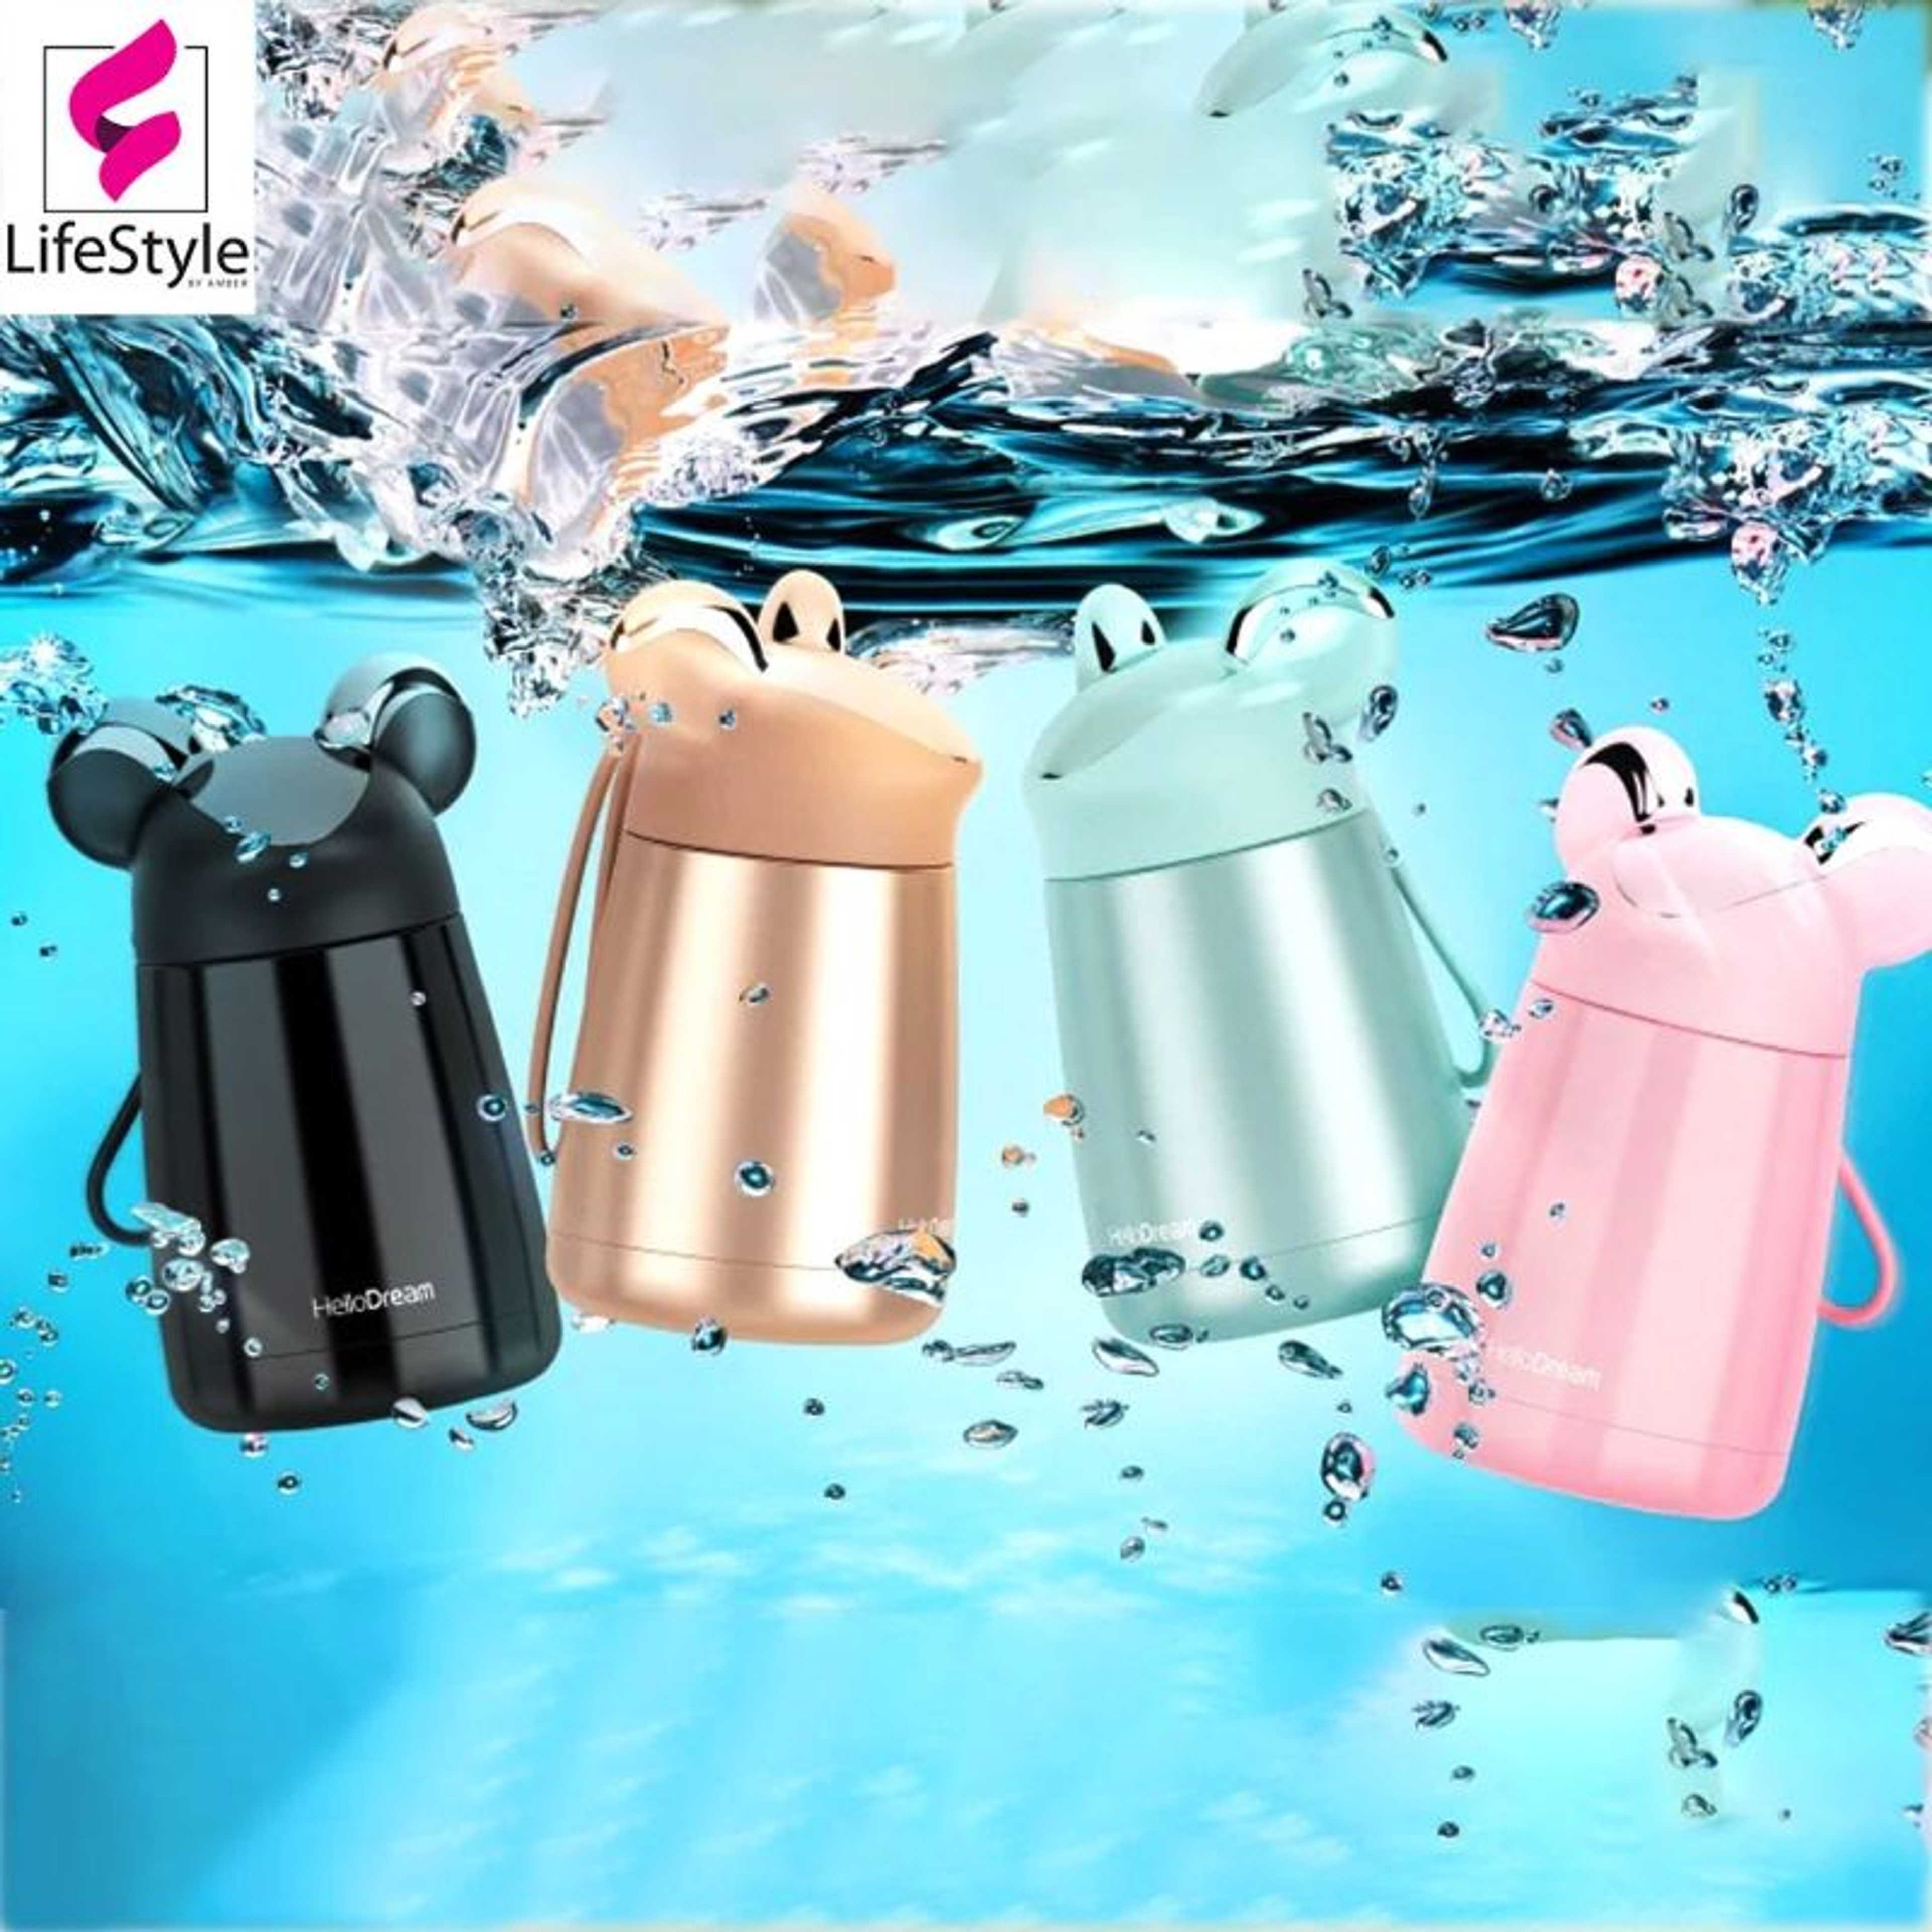 CLASSICAL STAINLESS STEEL THERMAL BOTTLE
